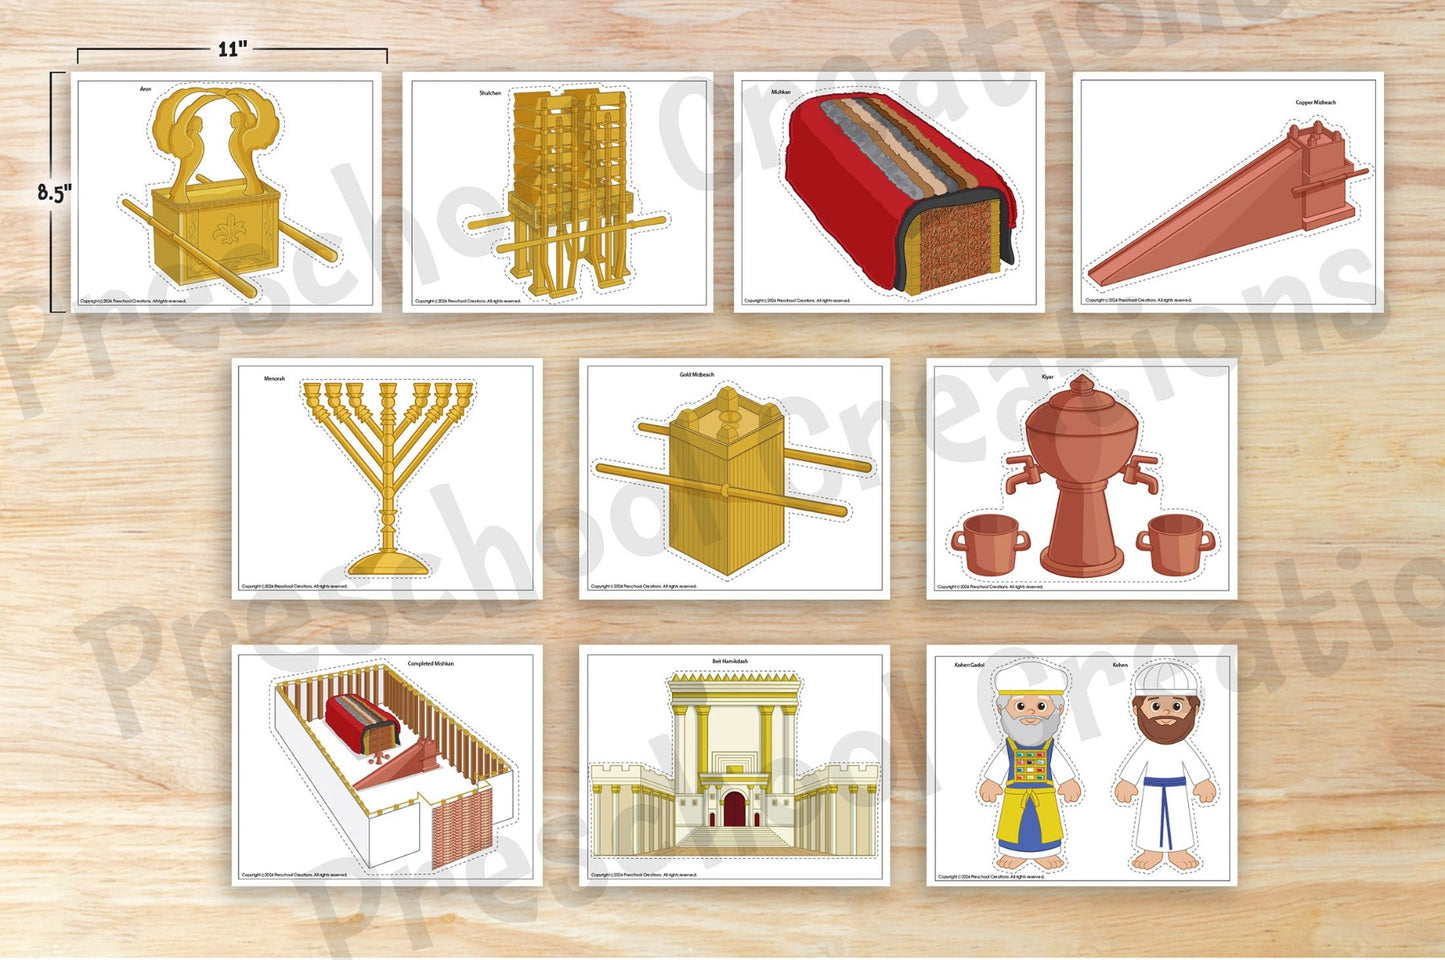 10 Full color pages of puppets and props for the Mishkan and Beis Hamikdash.   This set will help you teach Parshas Teruma, Tetzaveh, Vayakhel and Pekudei from Sefer Shemos. You can also use this set to teach about the Beis Hamikdash.  It includes the Mishkan and its keilim / vessels. It also includes a kohen and kohen gadol and the Beis Hamikdash.